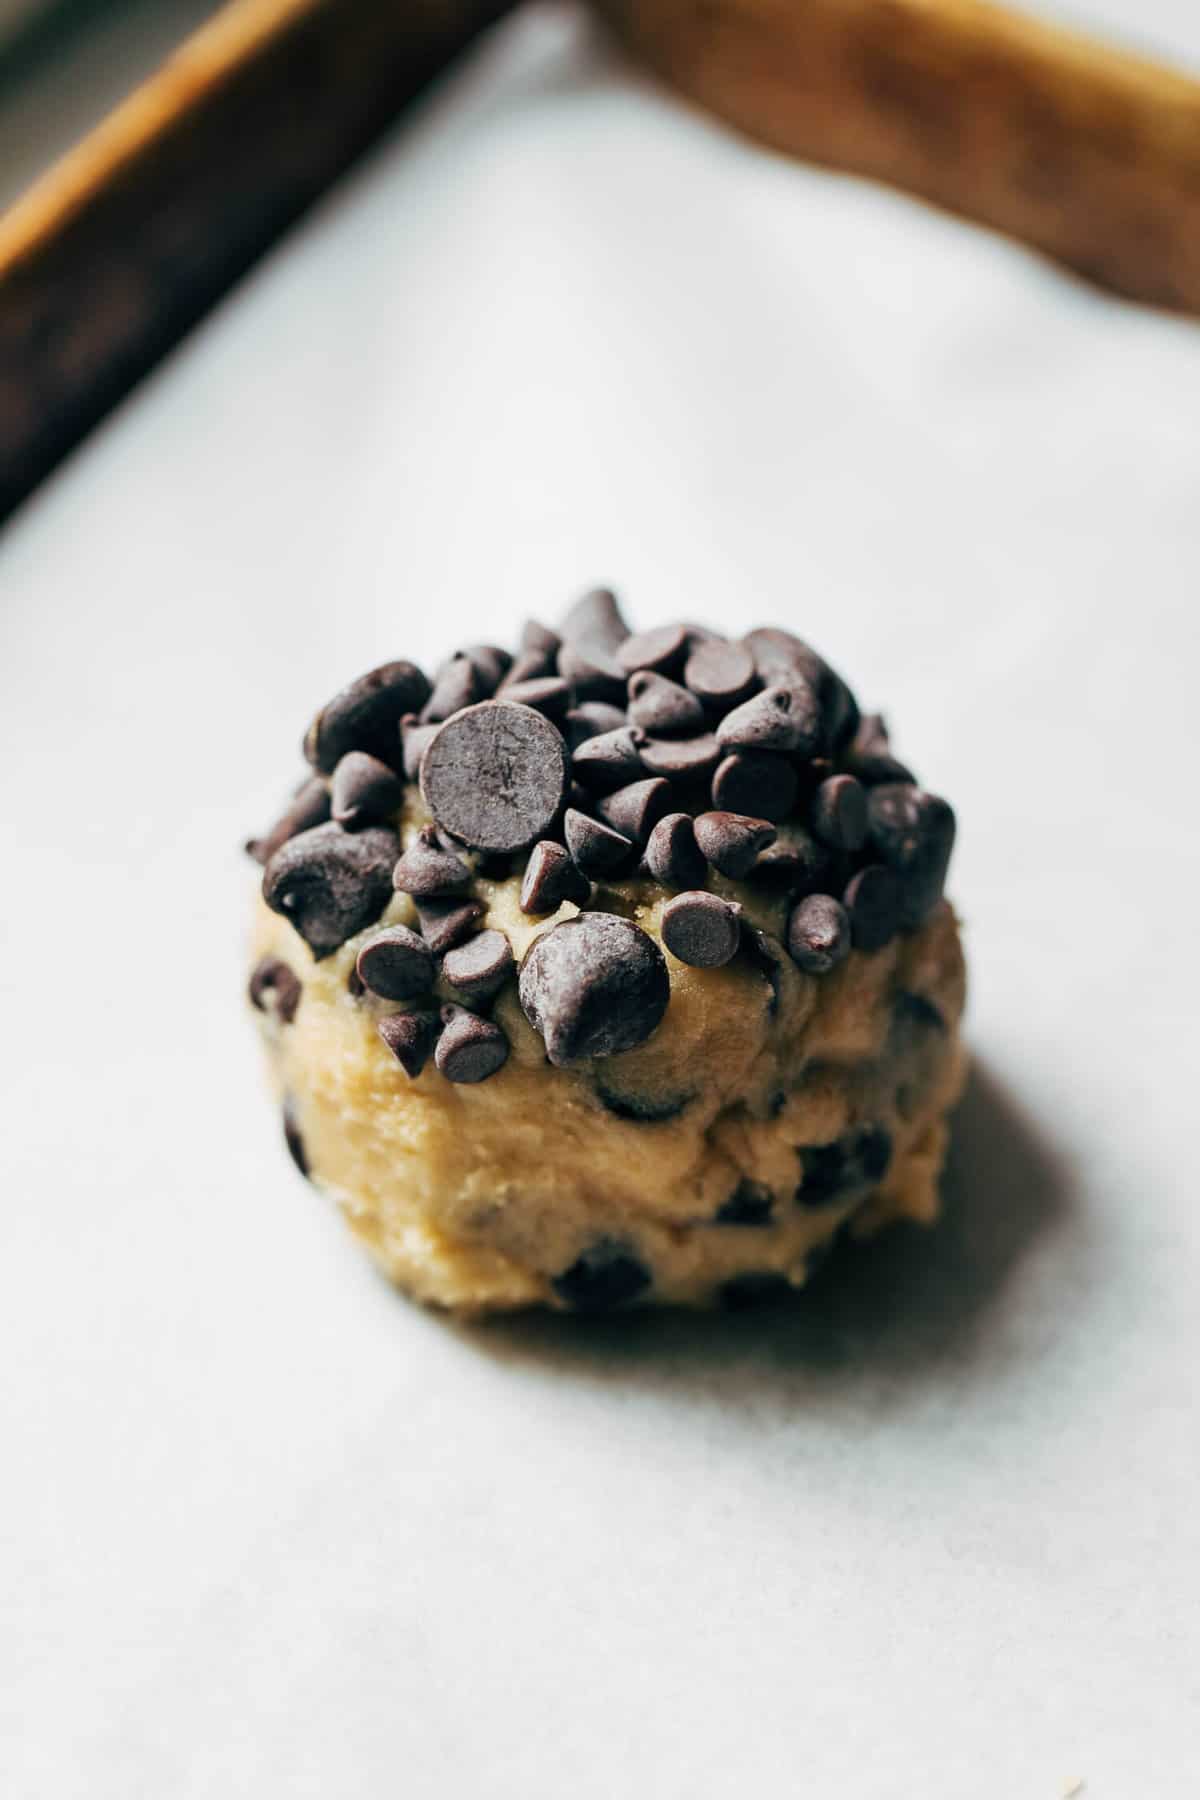 a cookie dough ball topped with chocolate chips